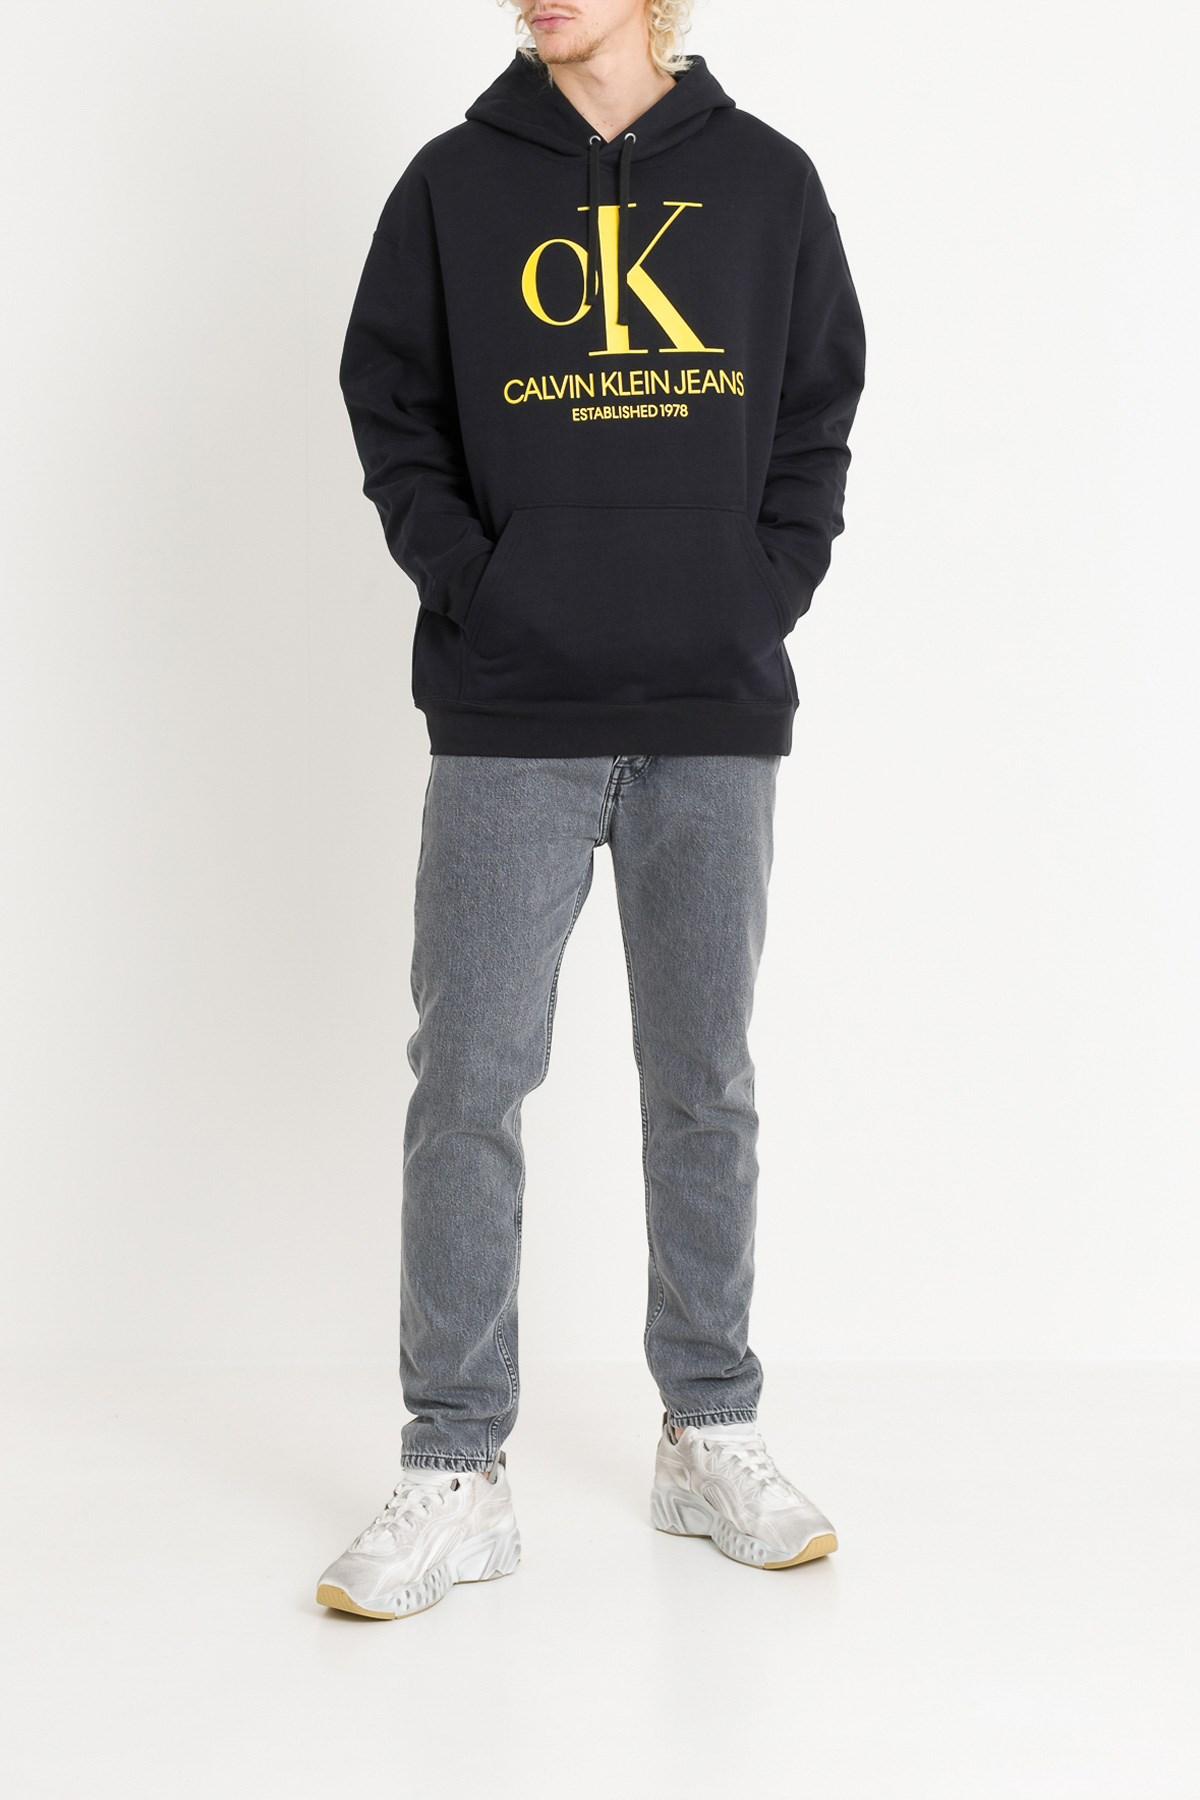 calvin klein est 1978 hoodie Cheaper Than Retail Price> Buy Clothing,  Accessories and lifestyle products for women & men -